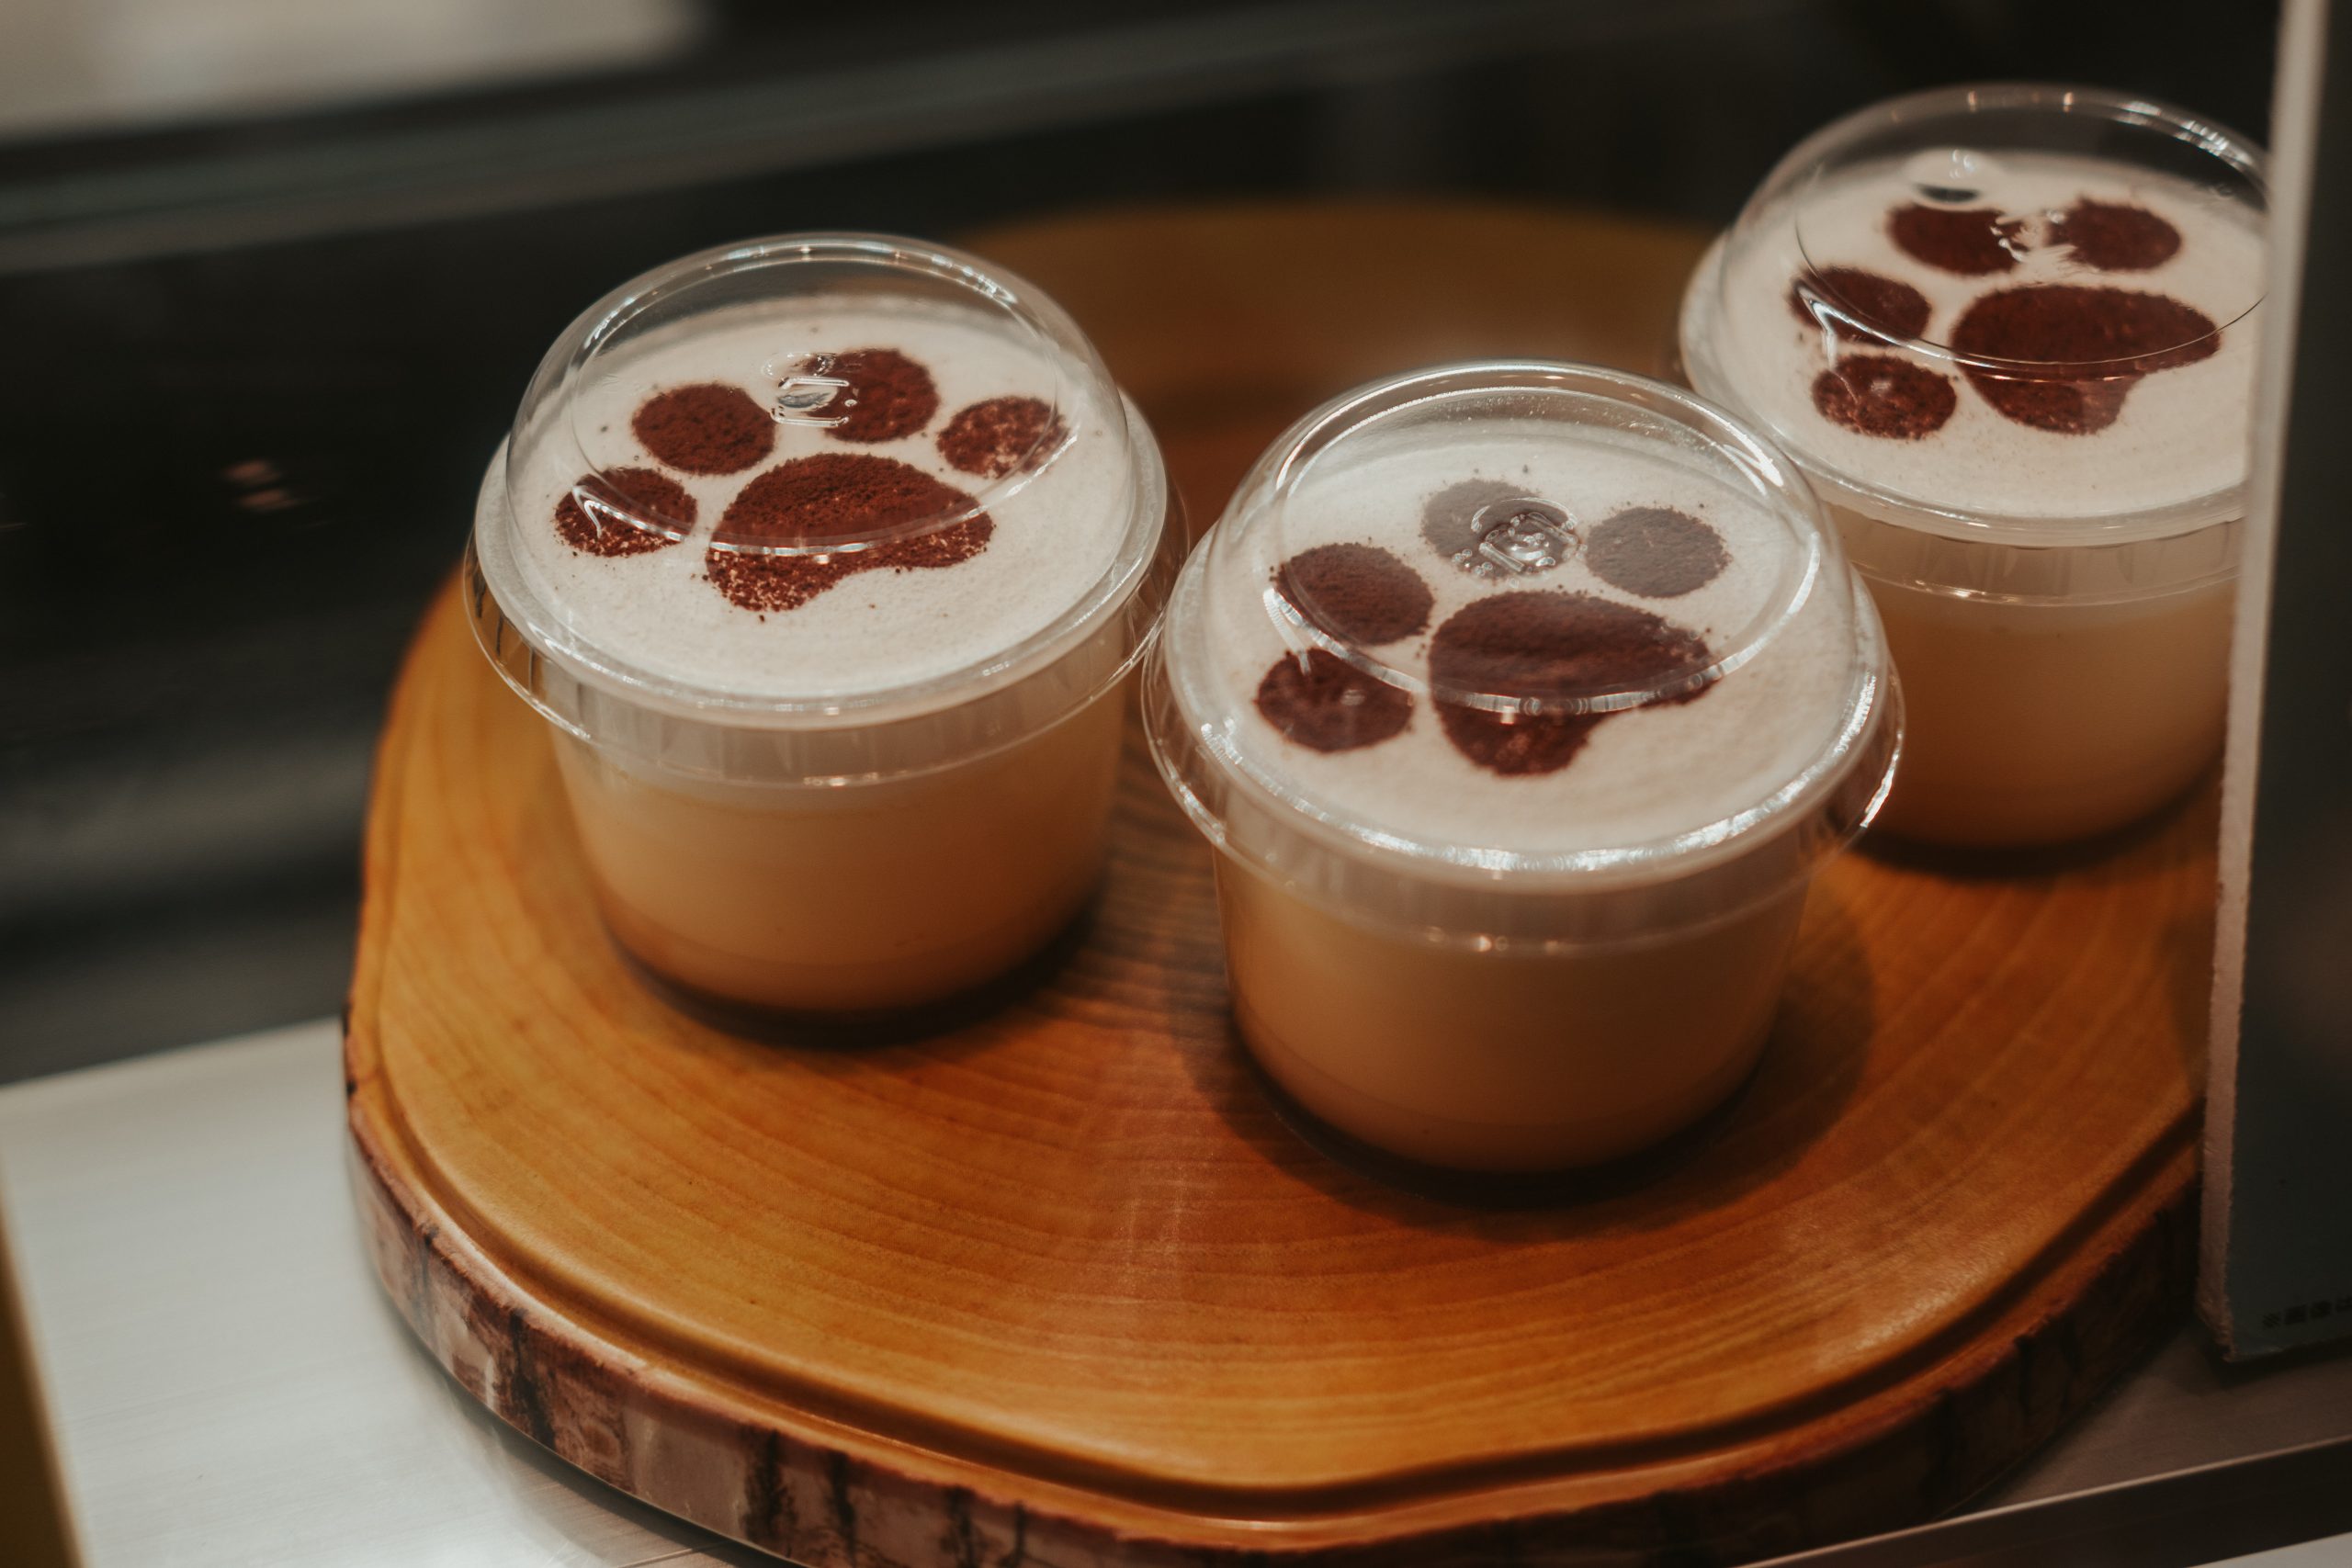 Cafe selling cat themed desserts